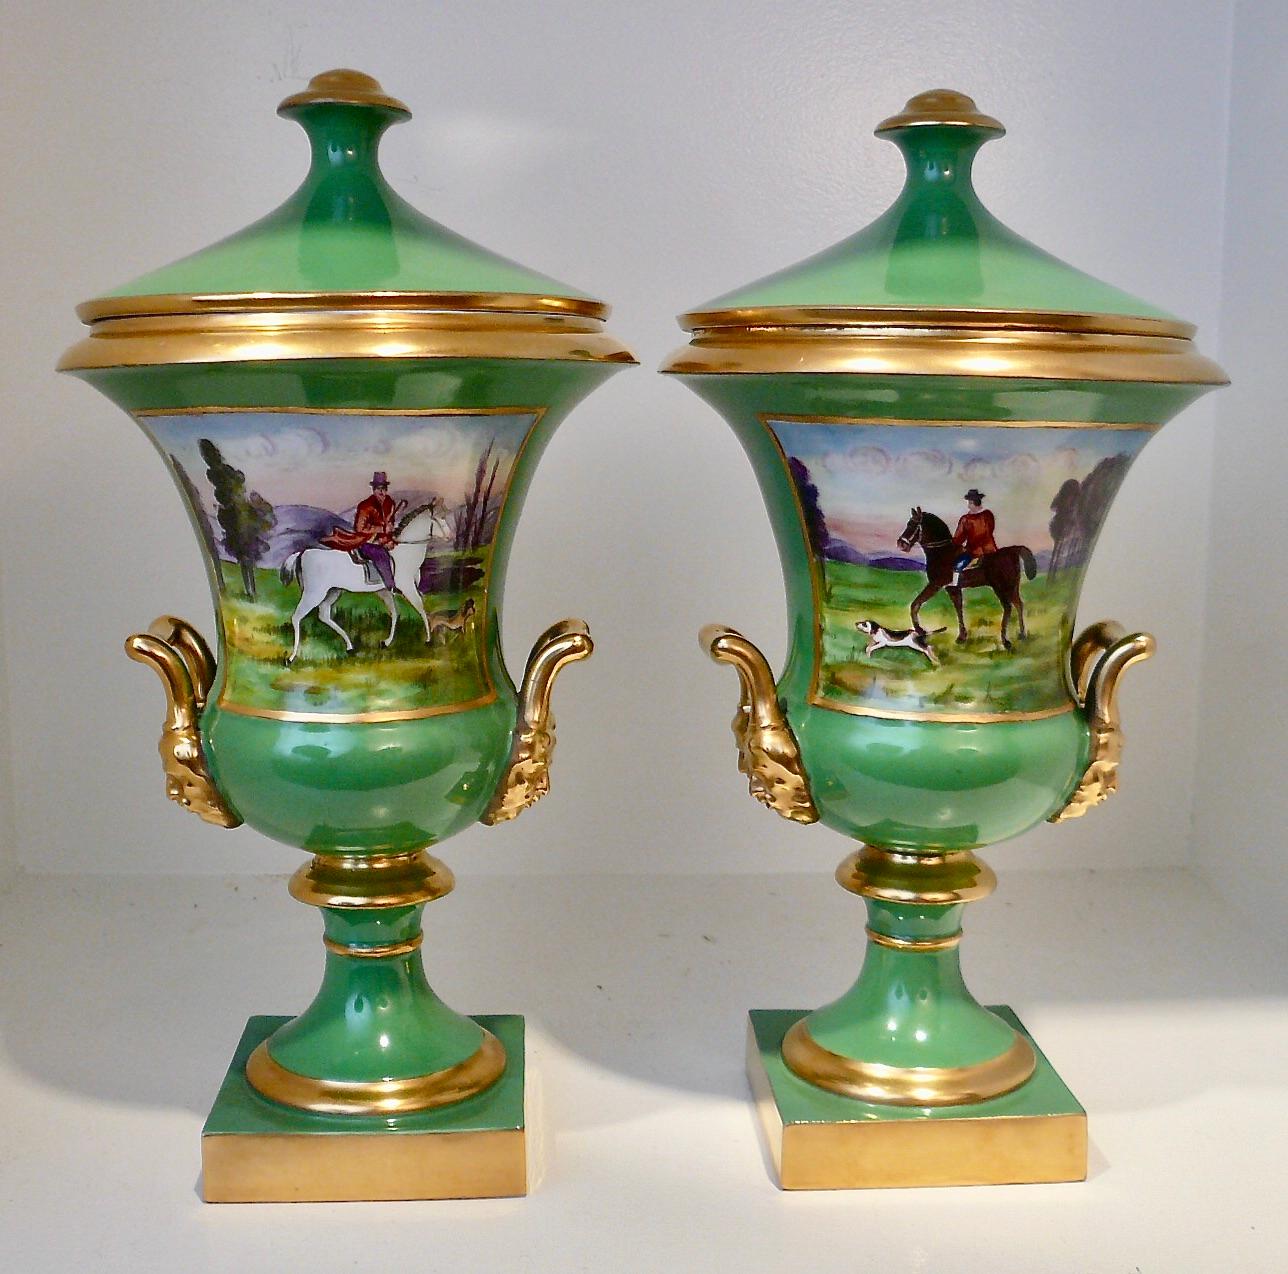 The handsome pair of apple green hand painted porcelain urns and covers feature hunting scenes on one side, and floral bouquets on the other.